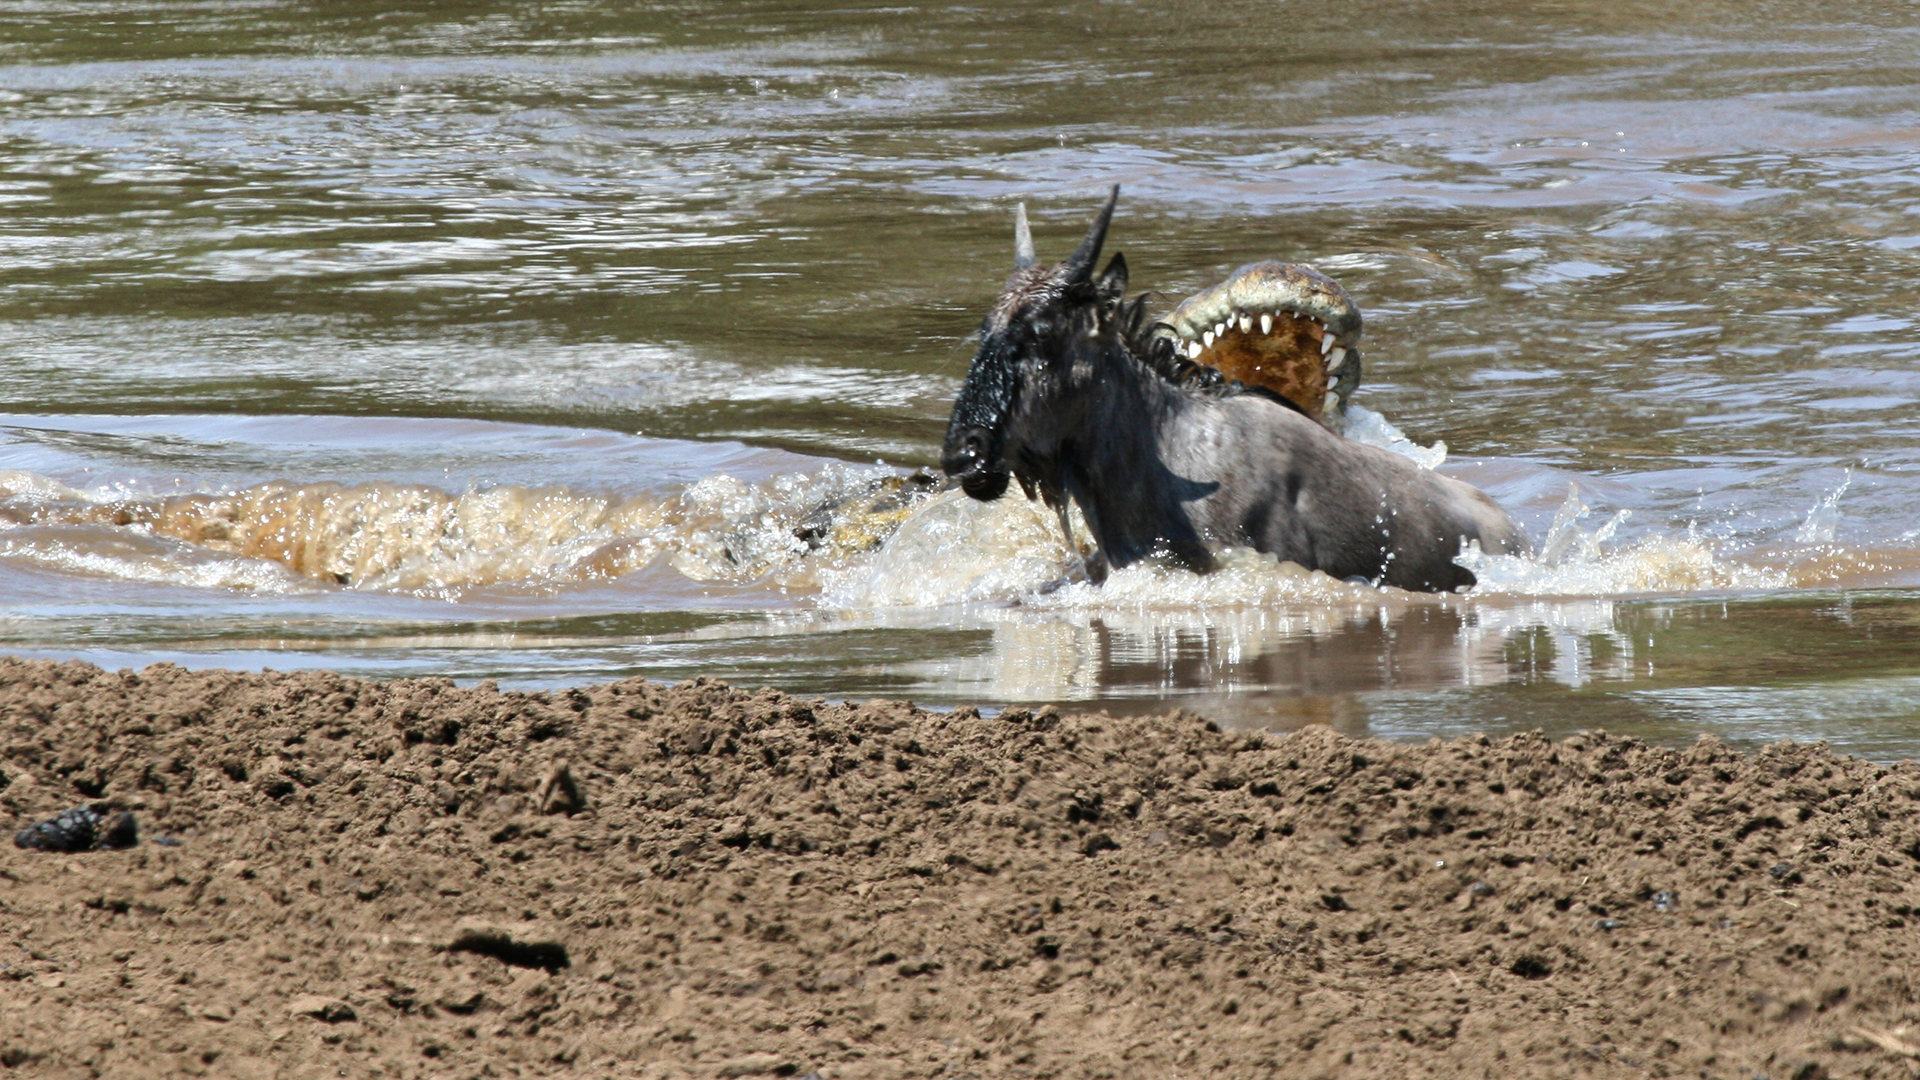 Massive croc grabs a wildebeest in shallow water.  This is from Zebras of the Serengeti. [Photo of the day - May 2022]